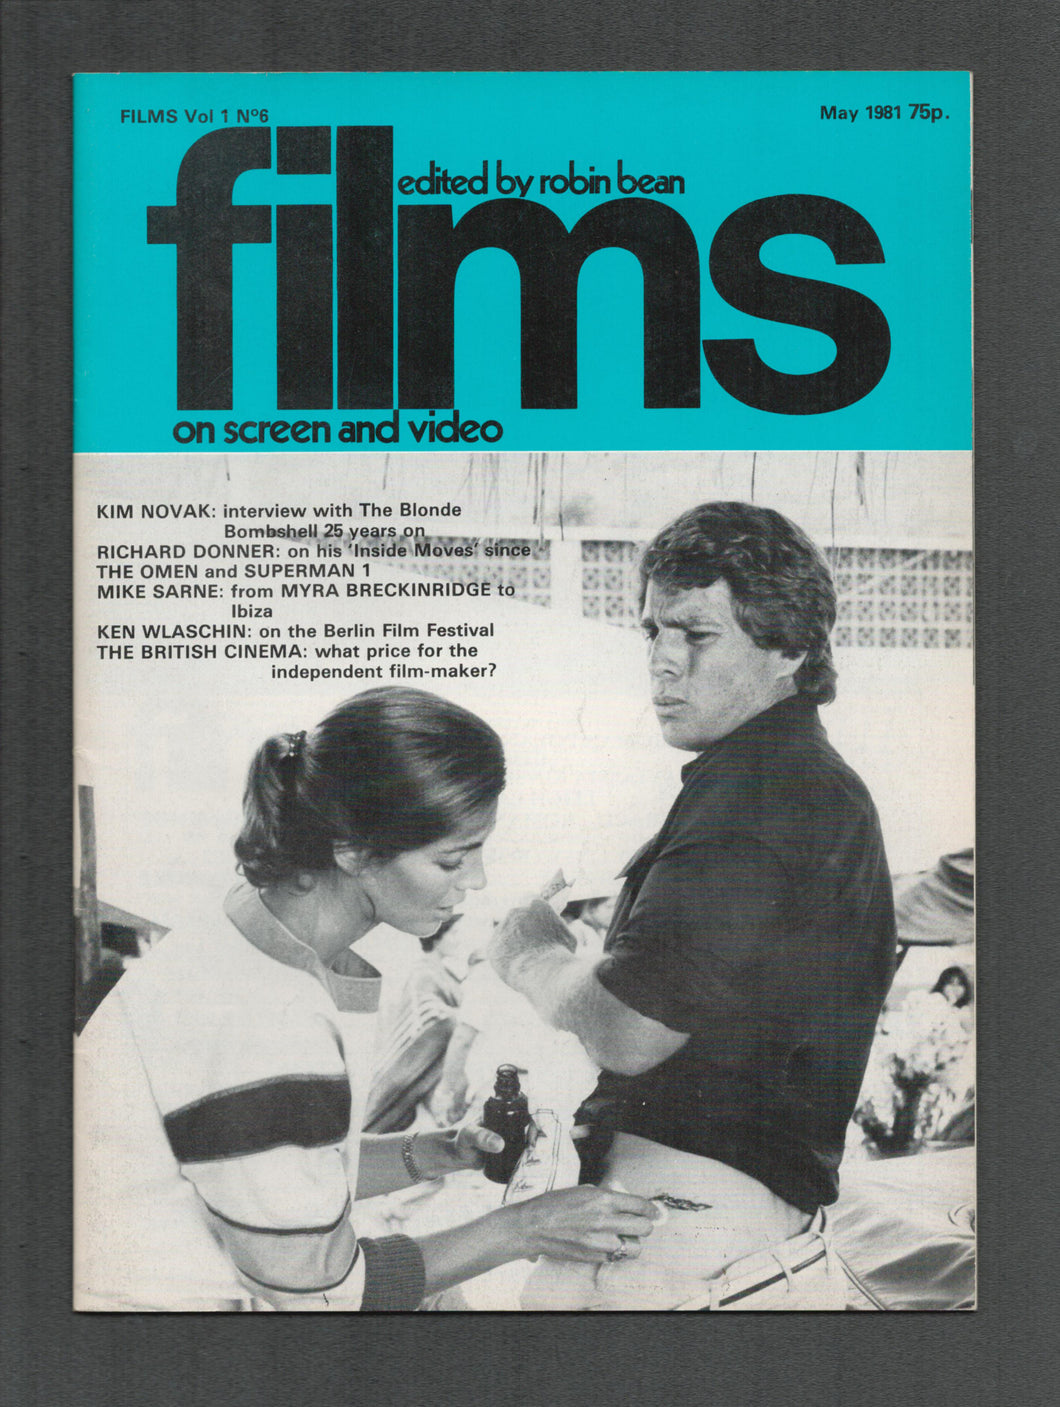 Films On Screen and Video Vol 1 No 6 May 1981